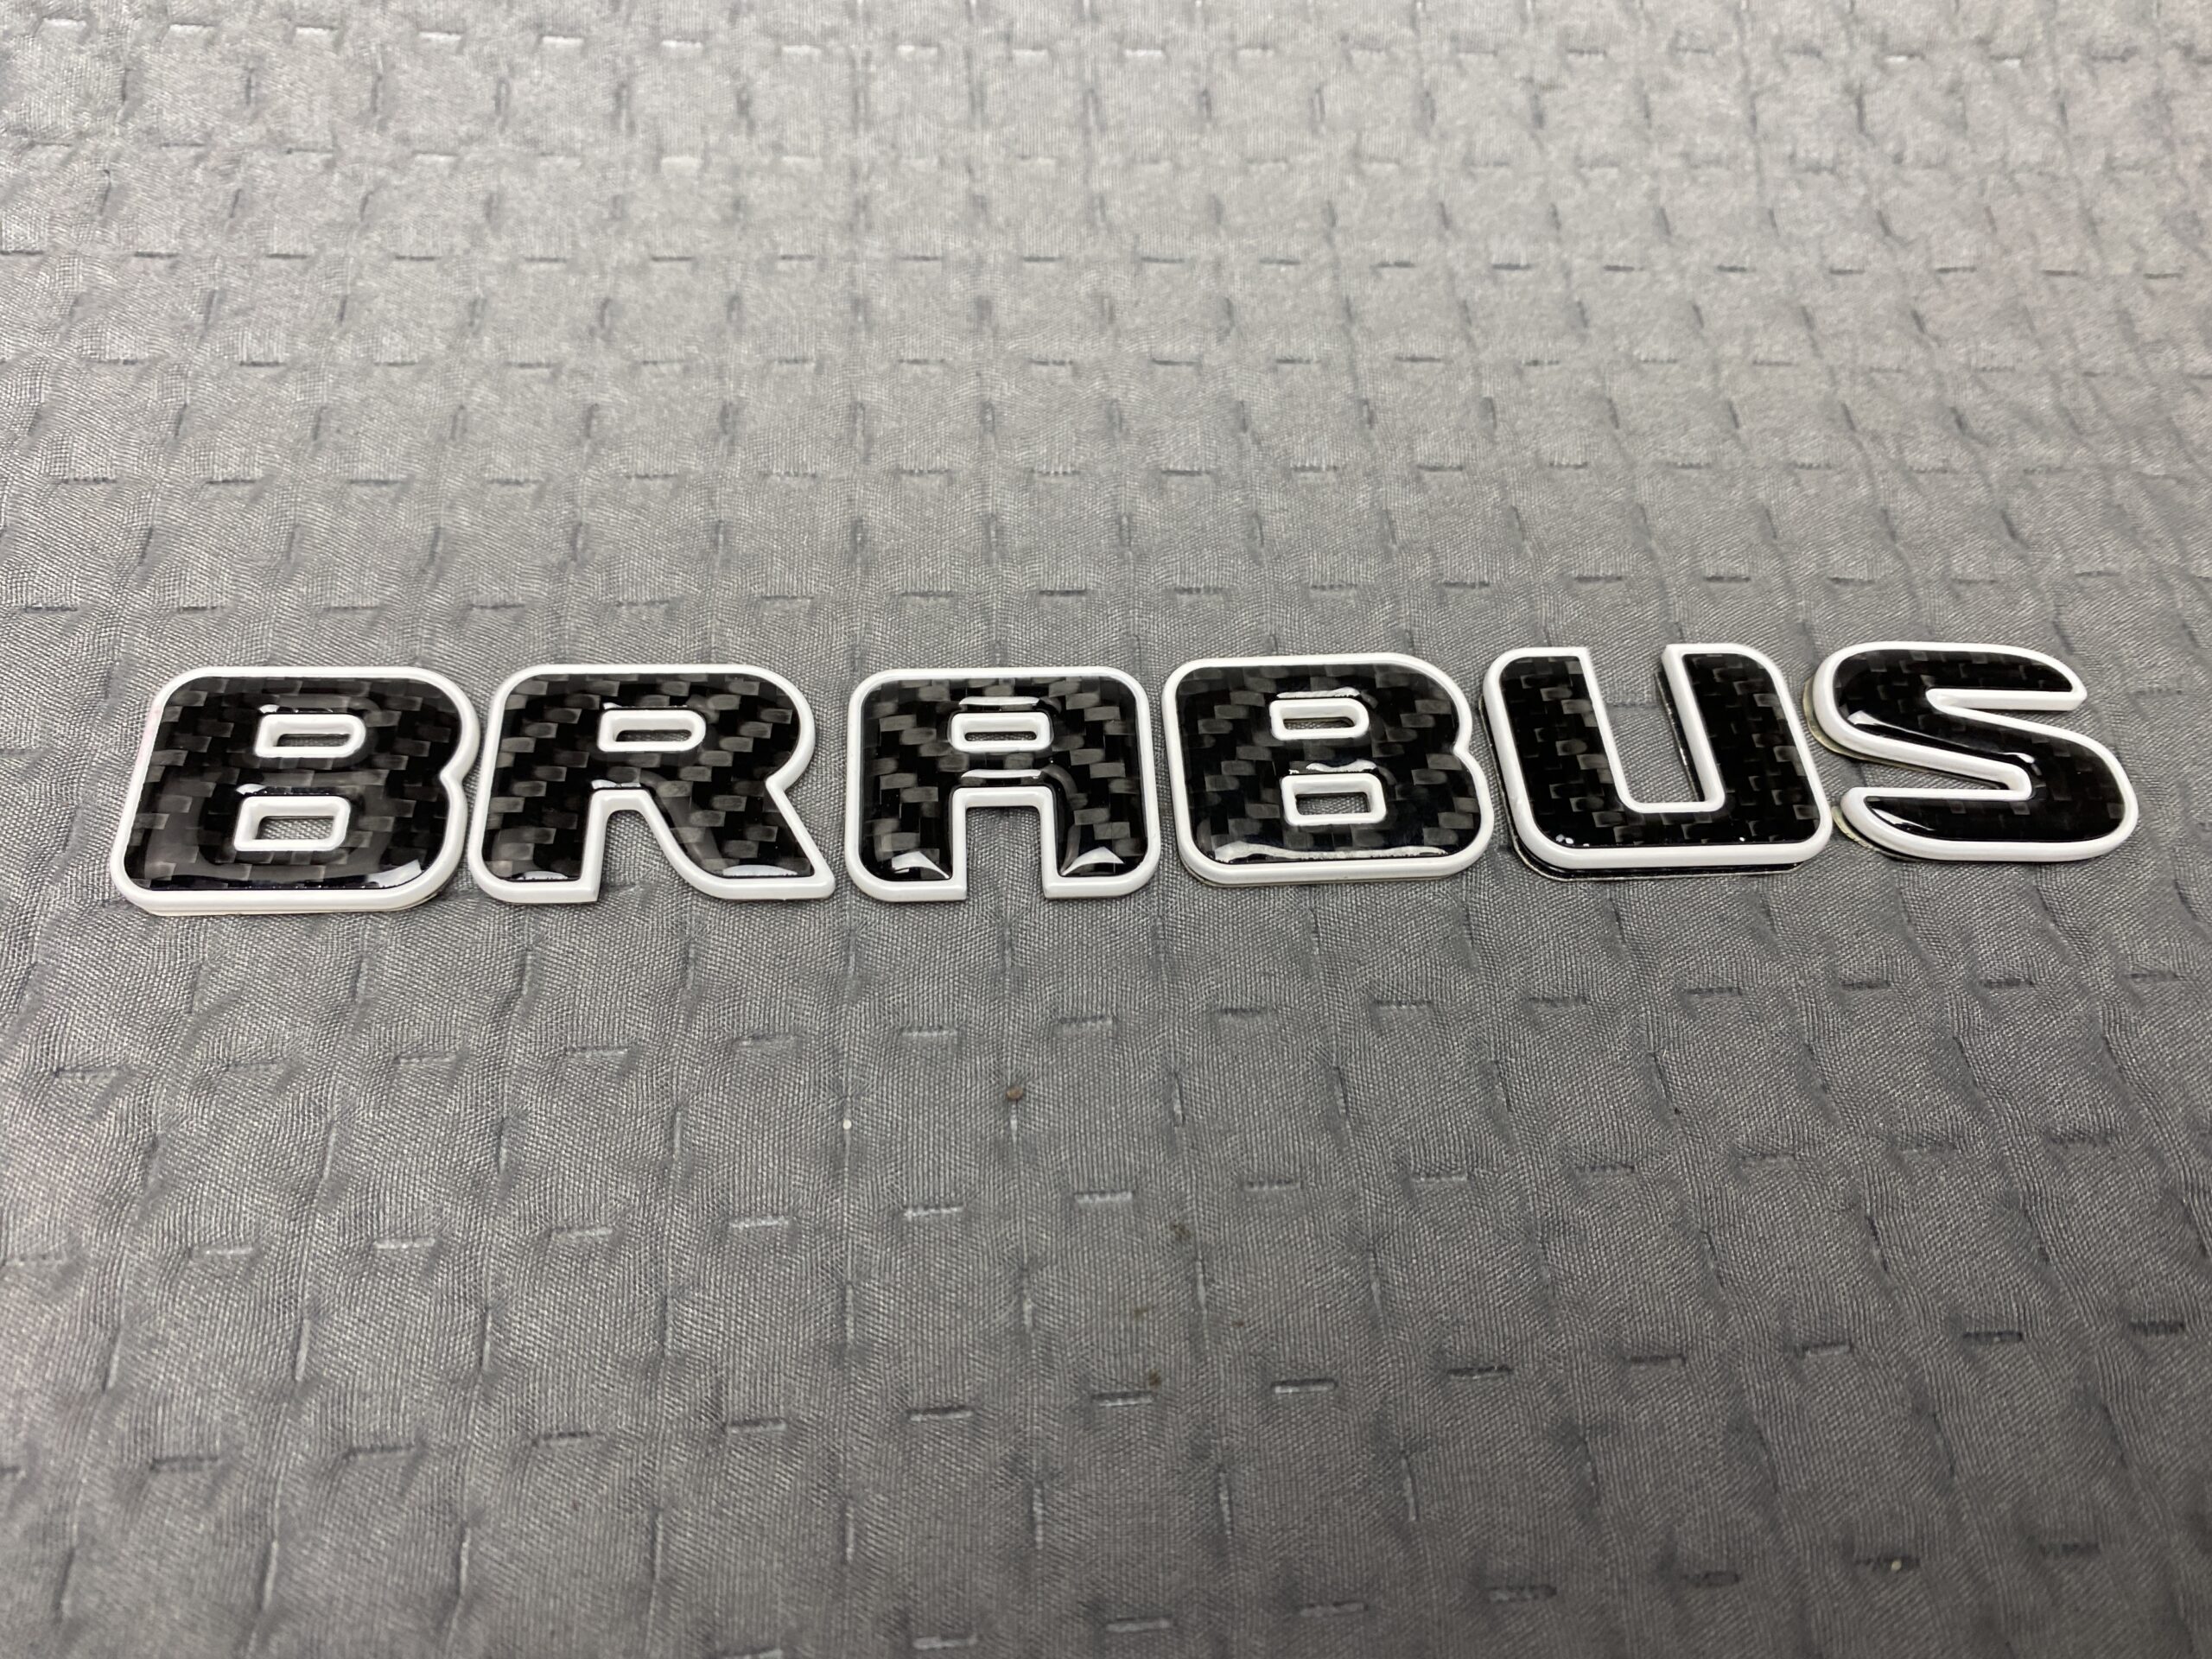 Tail Badges Emblem Brabus Roket Blue and Carbon for Mercedes-Benz G Class  W464 W463a W463 G63 GT GLS GLC GLB E CLS